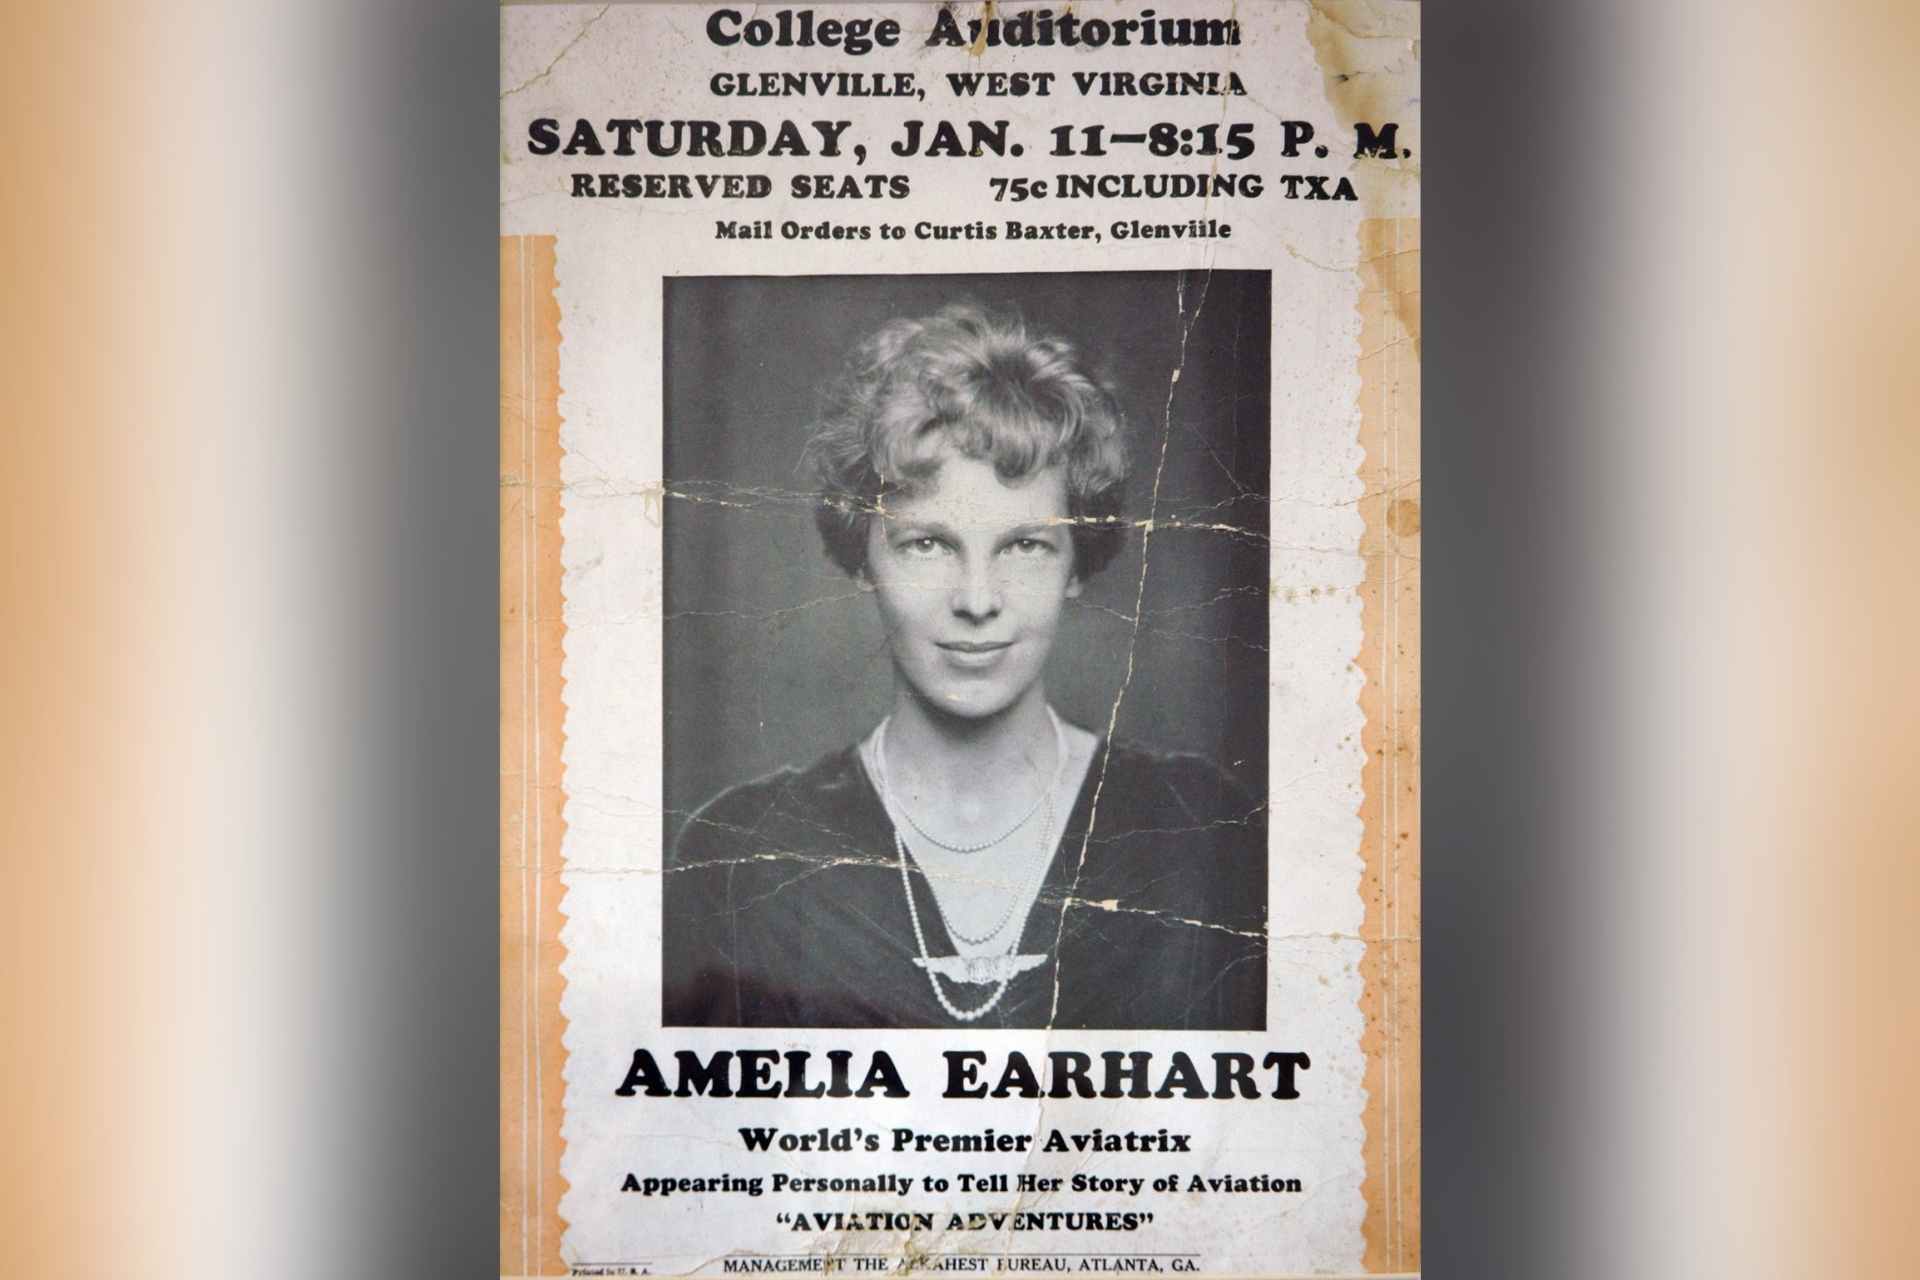 A poster advertising Amelia Earhart’s visit to Glenville State College in 1936.